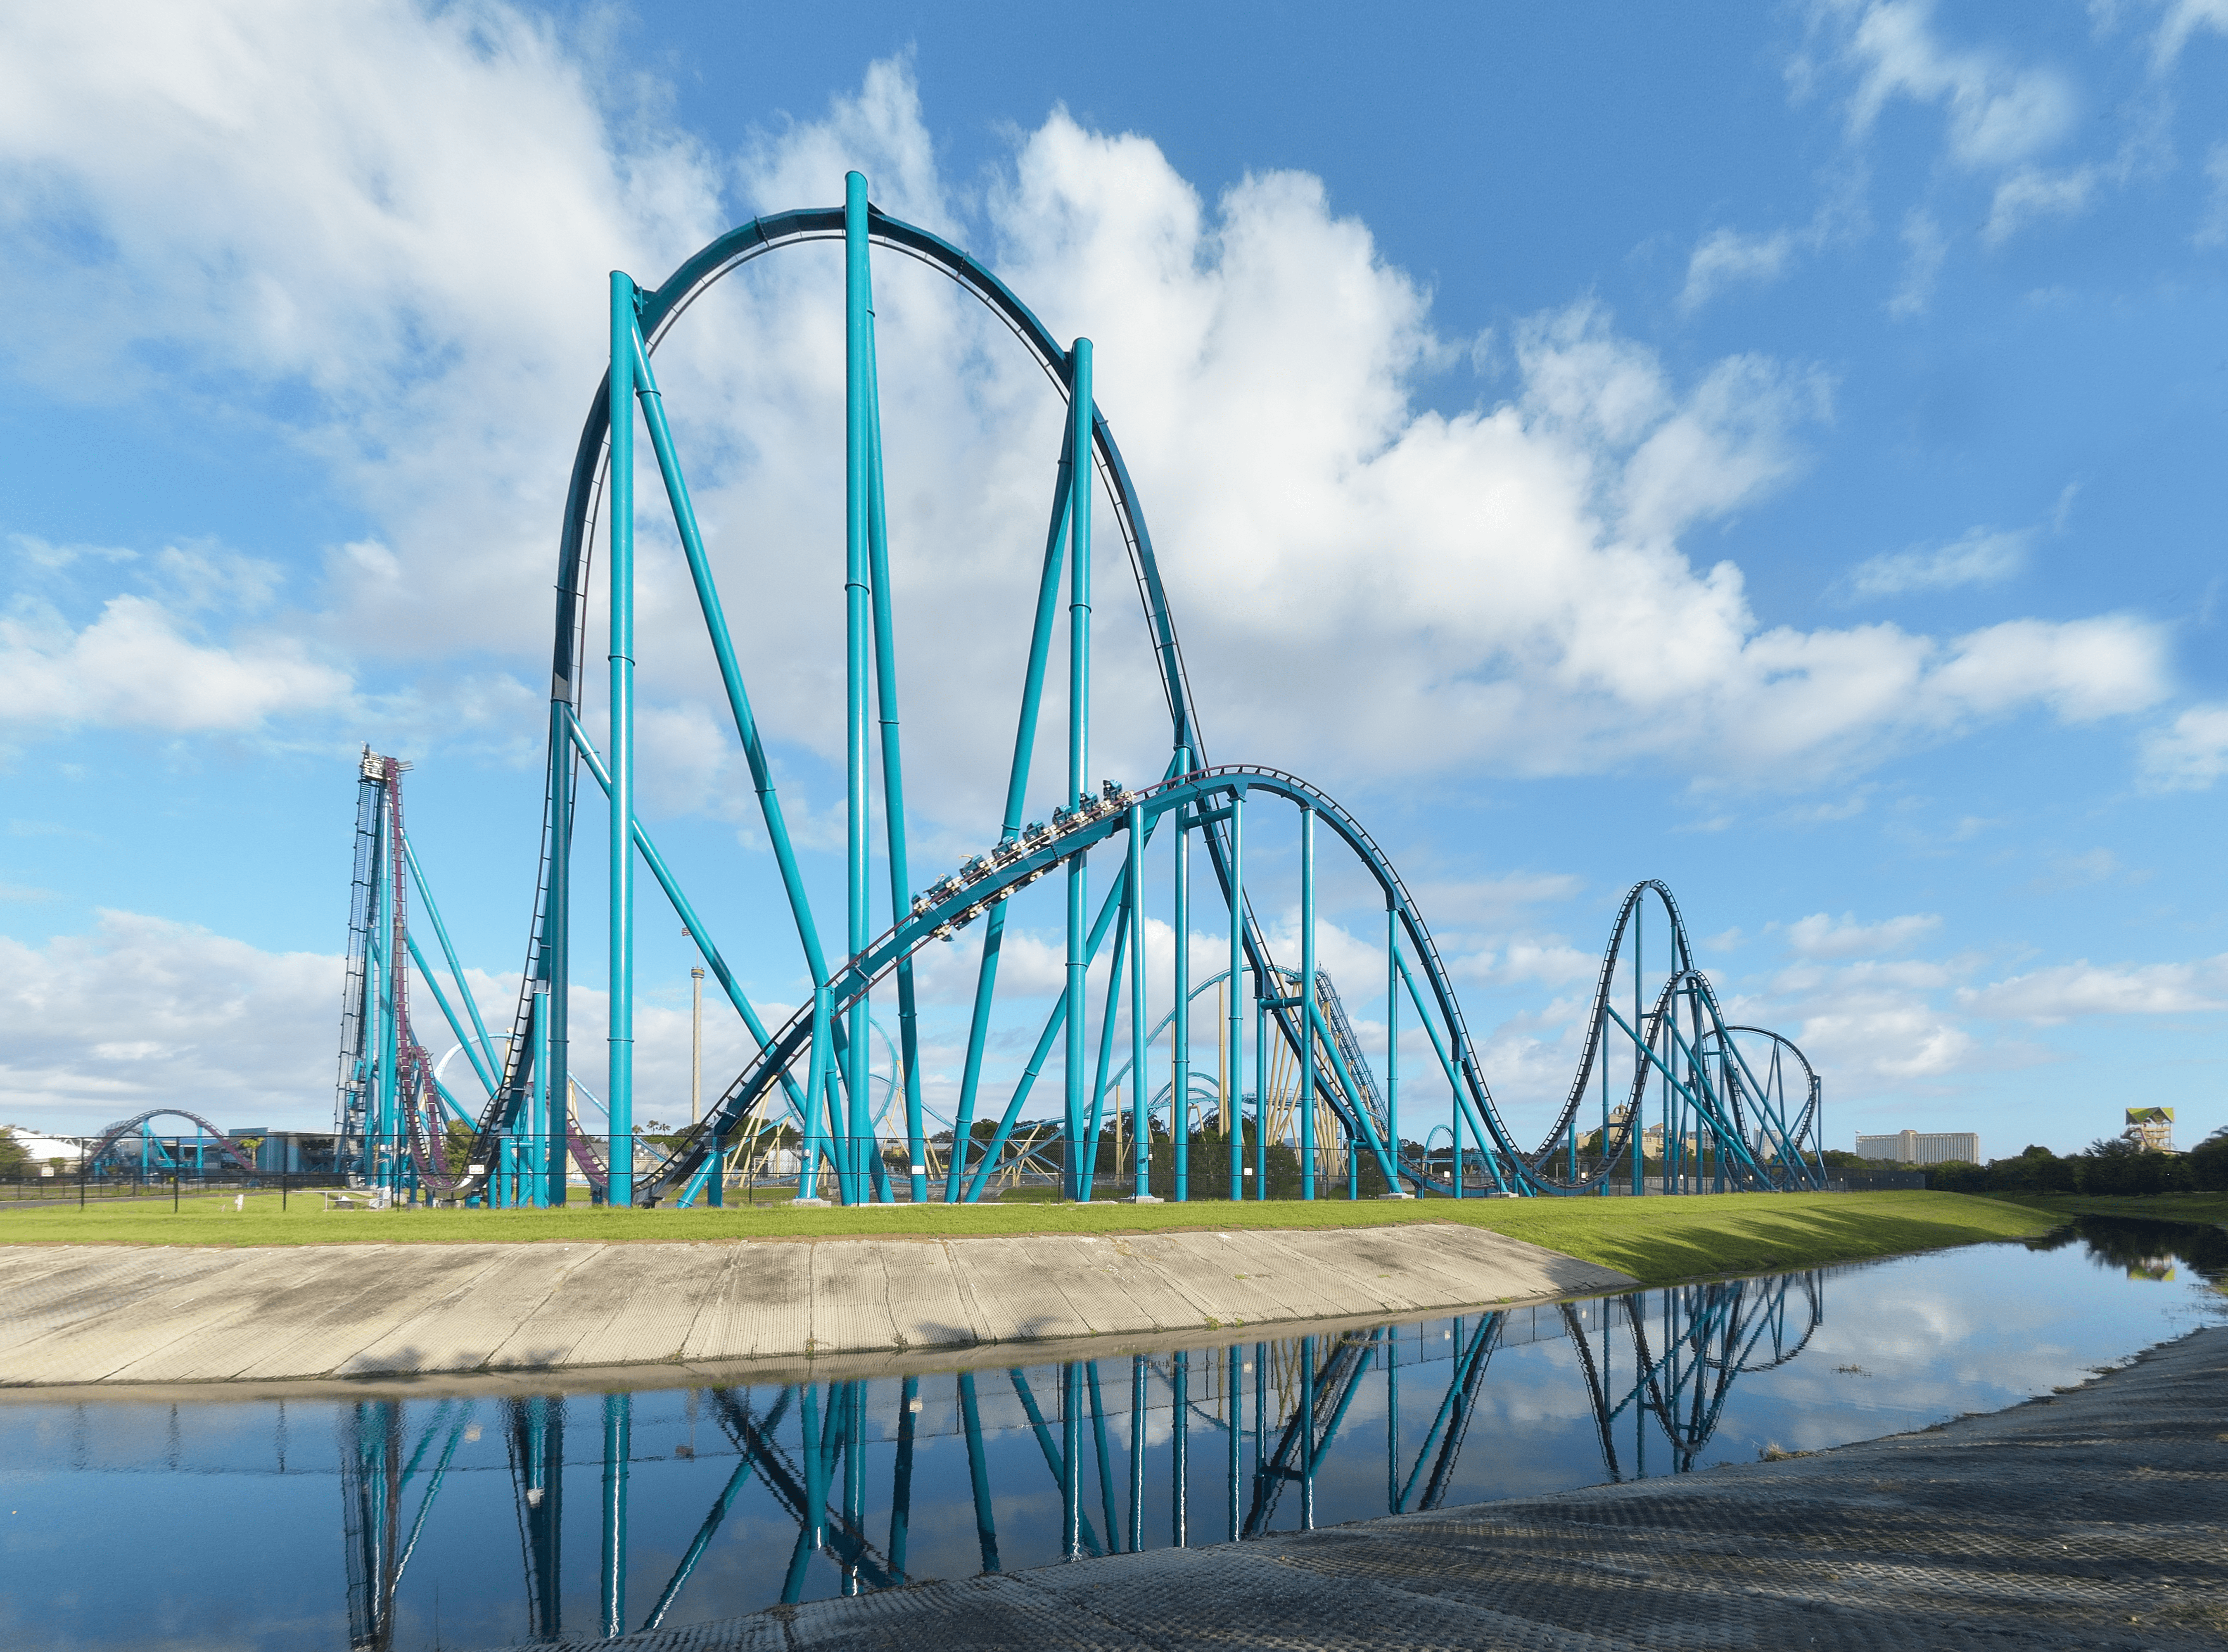 Mako rollercoaster shows dramatic scale and features